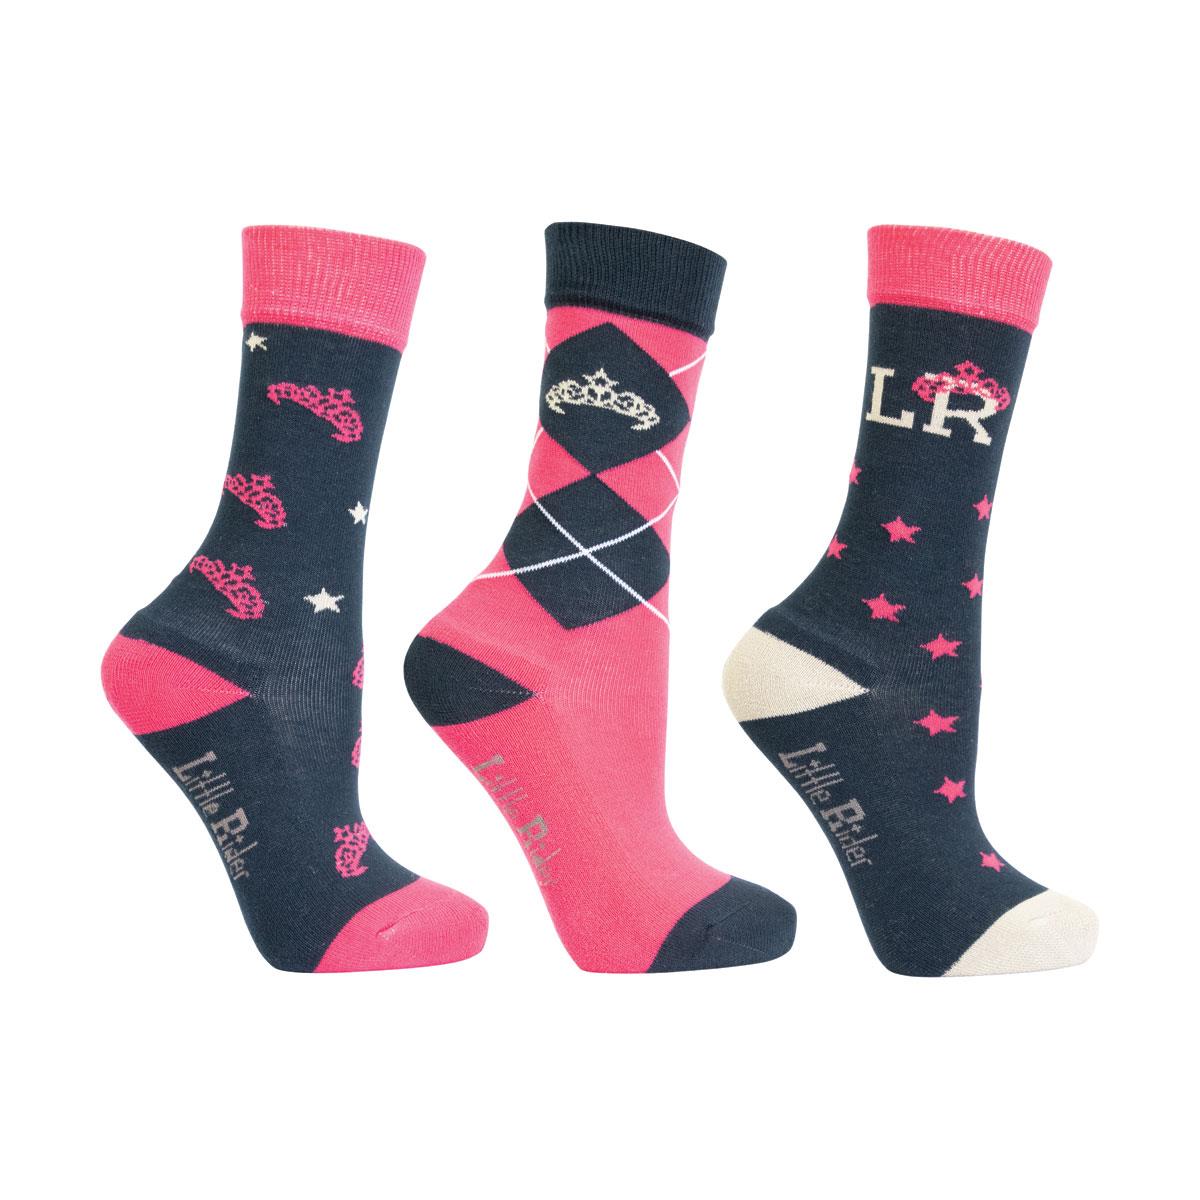 Sasha Horse Riding Socks By Little Rider (Pack Of 3) - Just Horse Riders